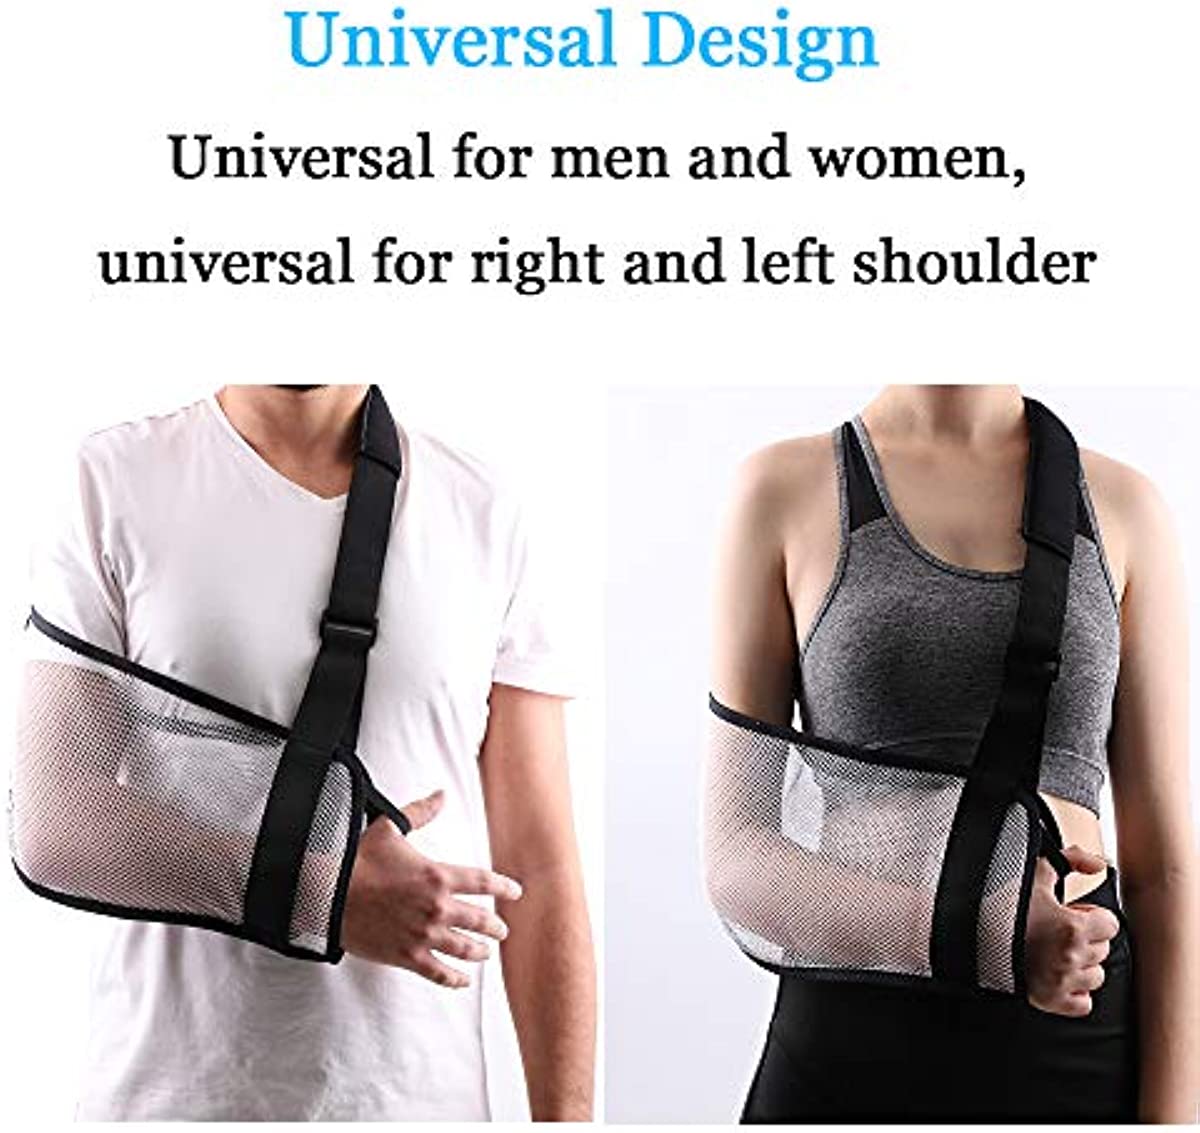 Mesh Arm Shoulder Sling Great Shower Bath Sling Used after rotator cuff Shoulder Surgery Arm Brace Support for Men and Women,White